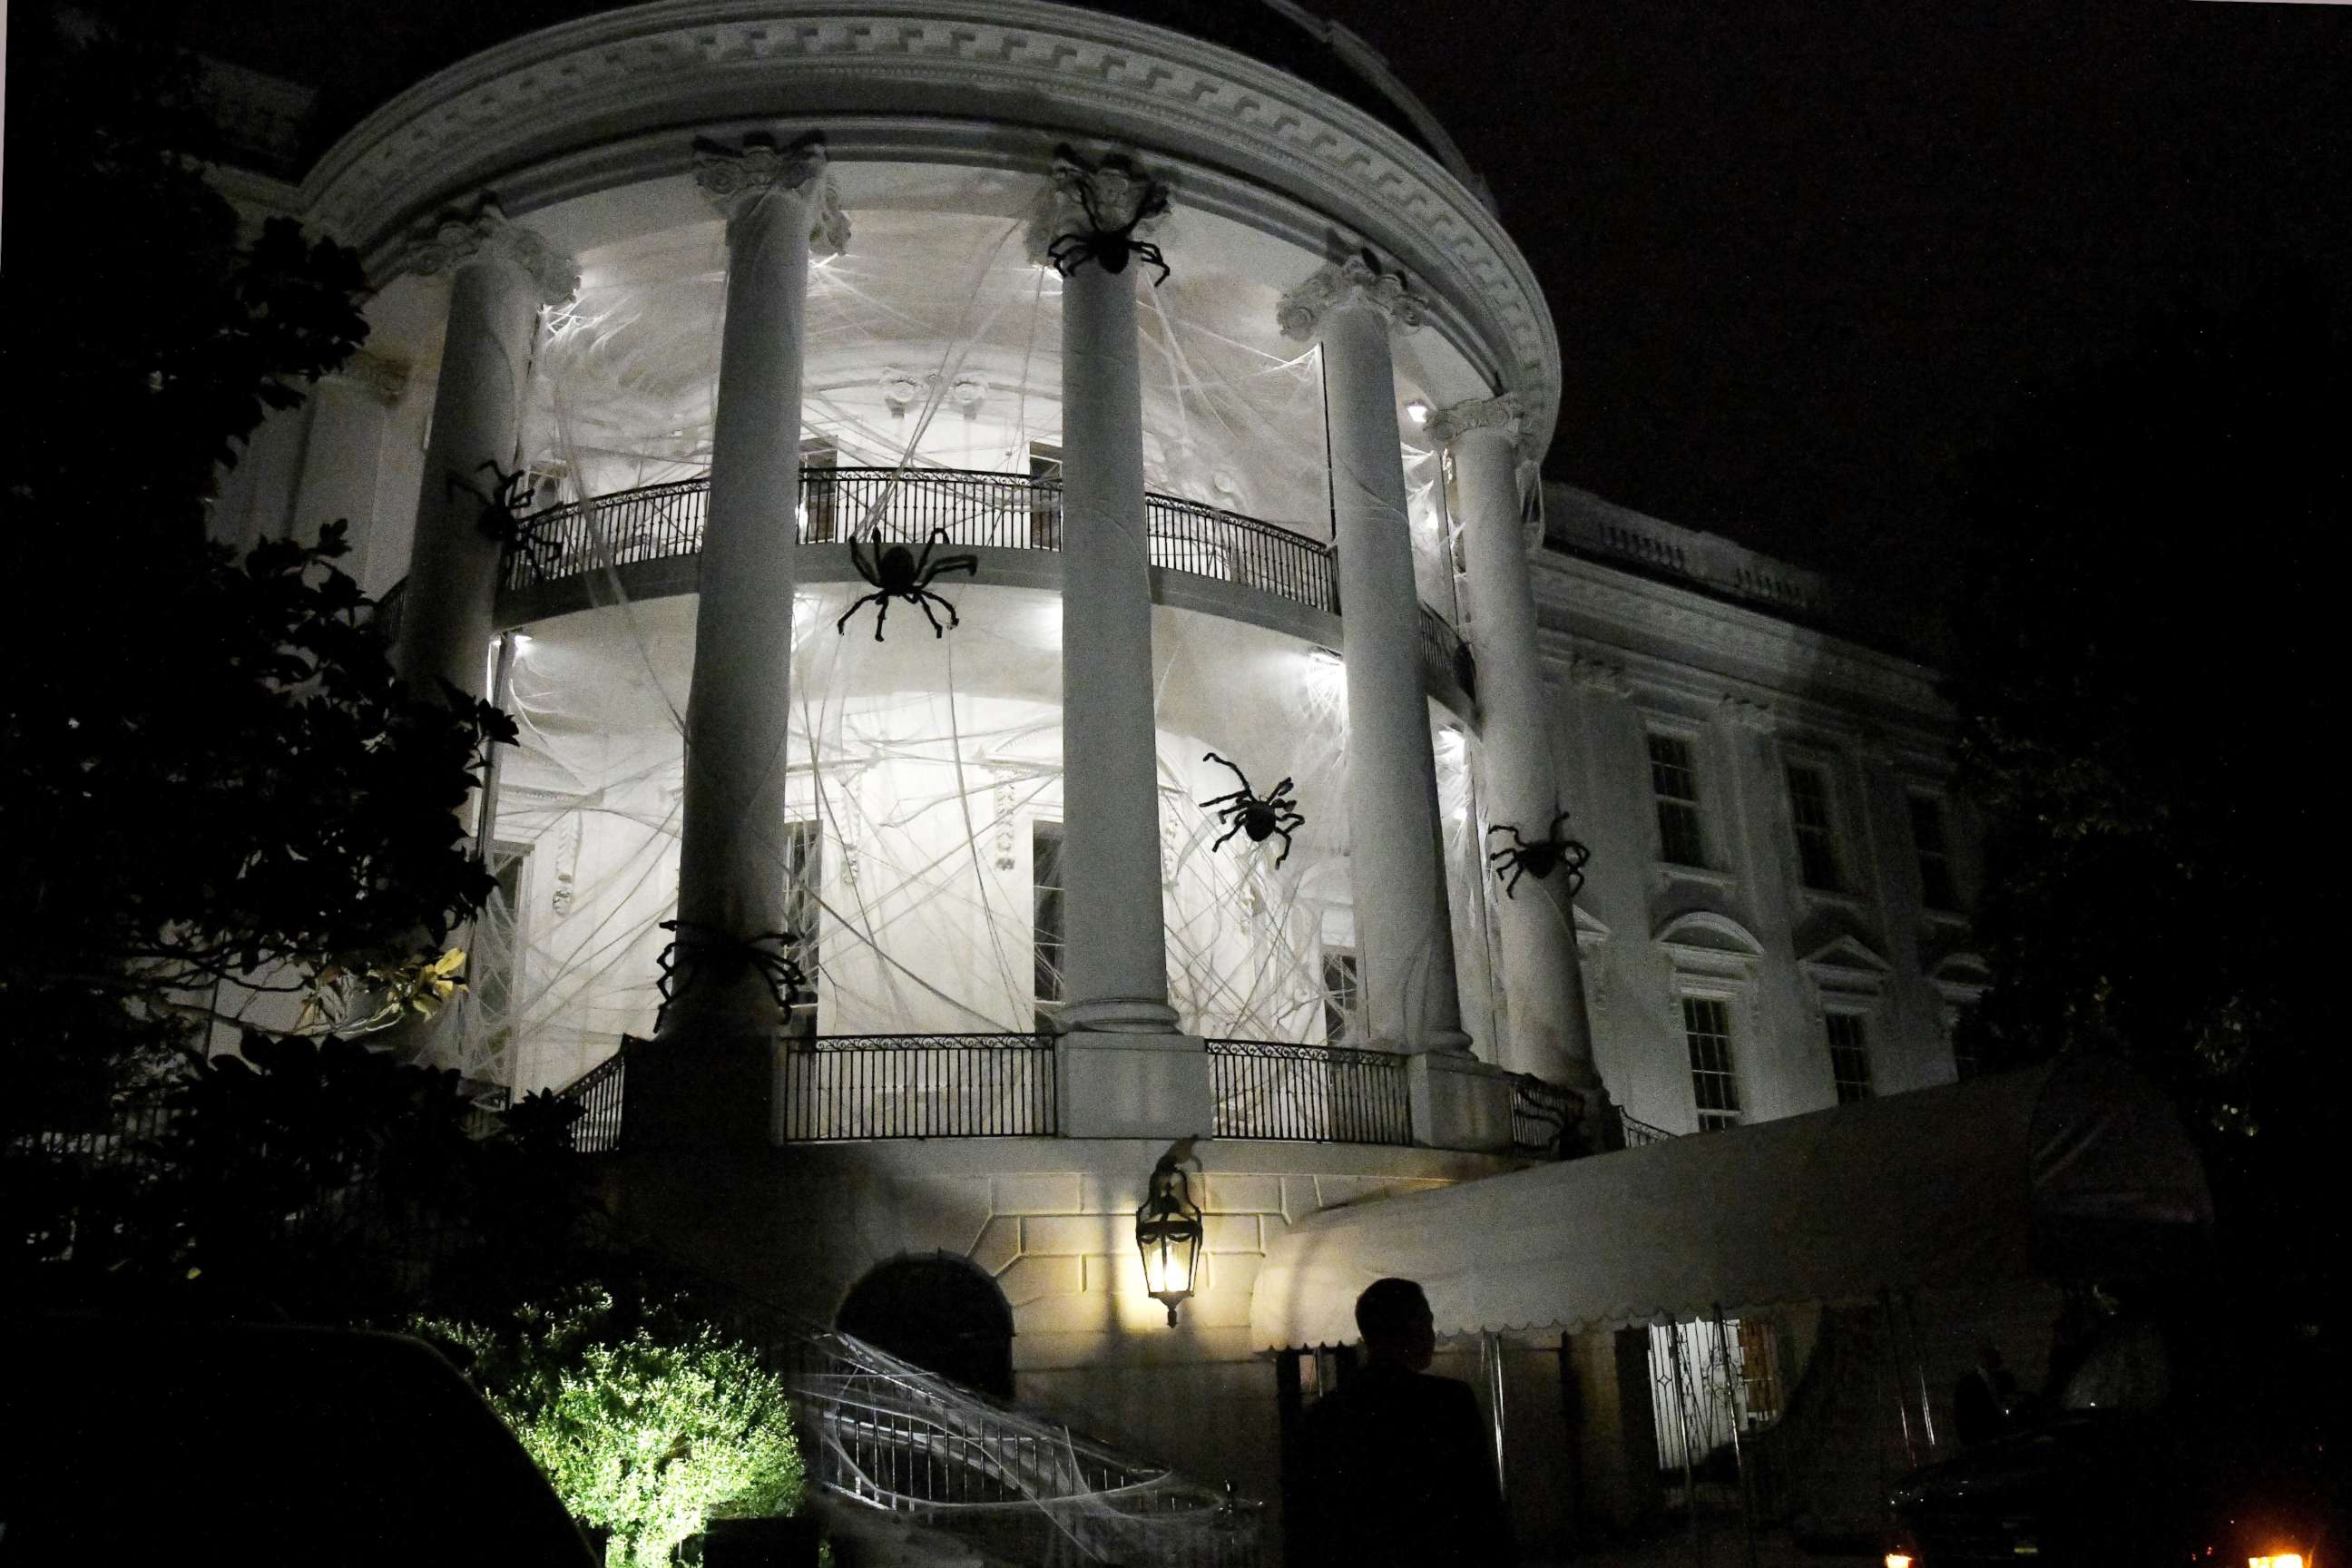 PHOTO: The South Portico of the White House is covered in decorations for Halloween, October 28, 2017 in Washington, DC.